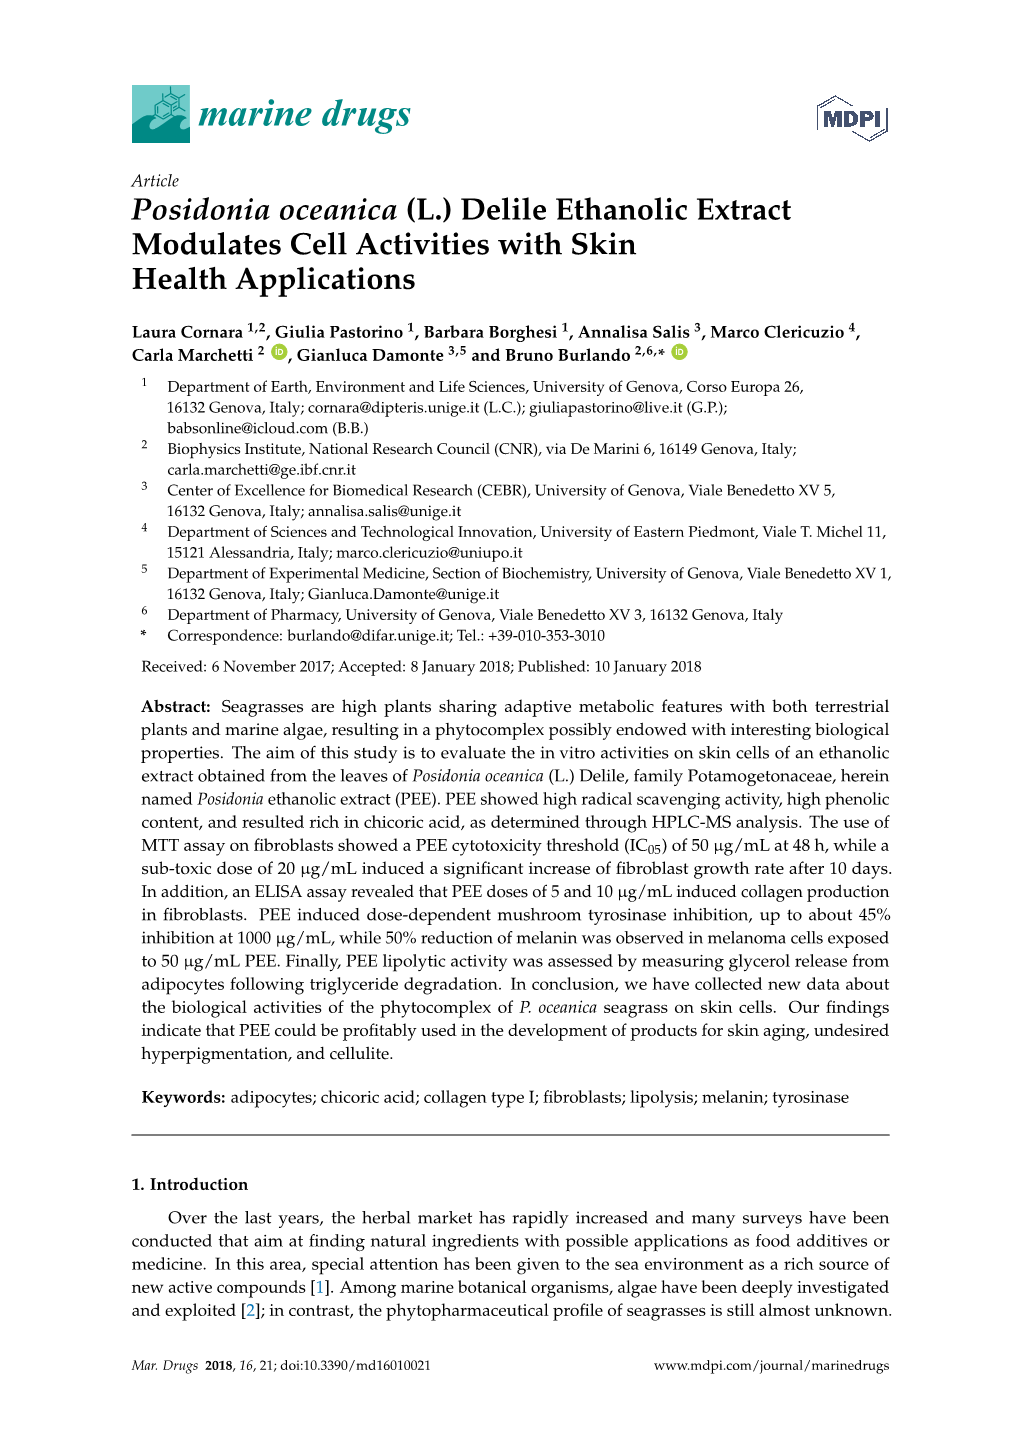 Posidonia Oceanica (L.) Delile Ethanolic Extract Modulates Cell Activities with Skin Health Applications